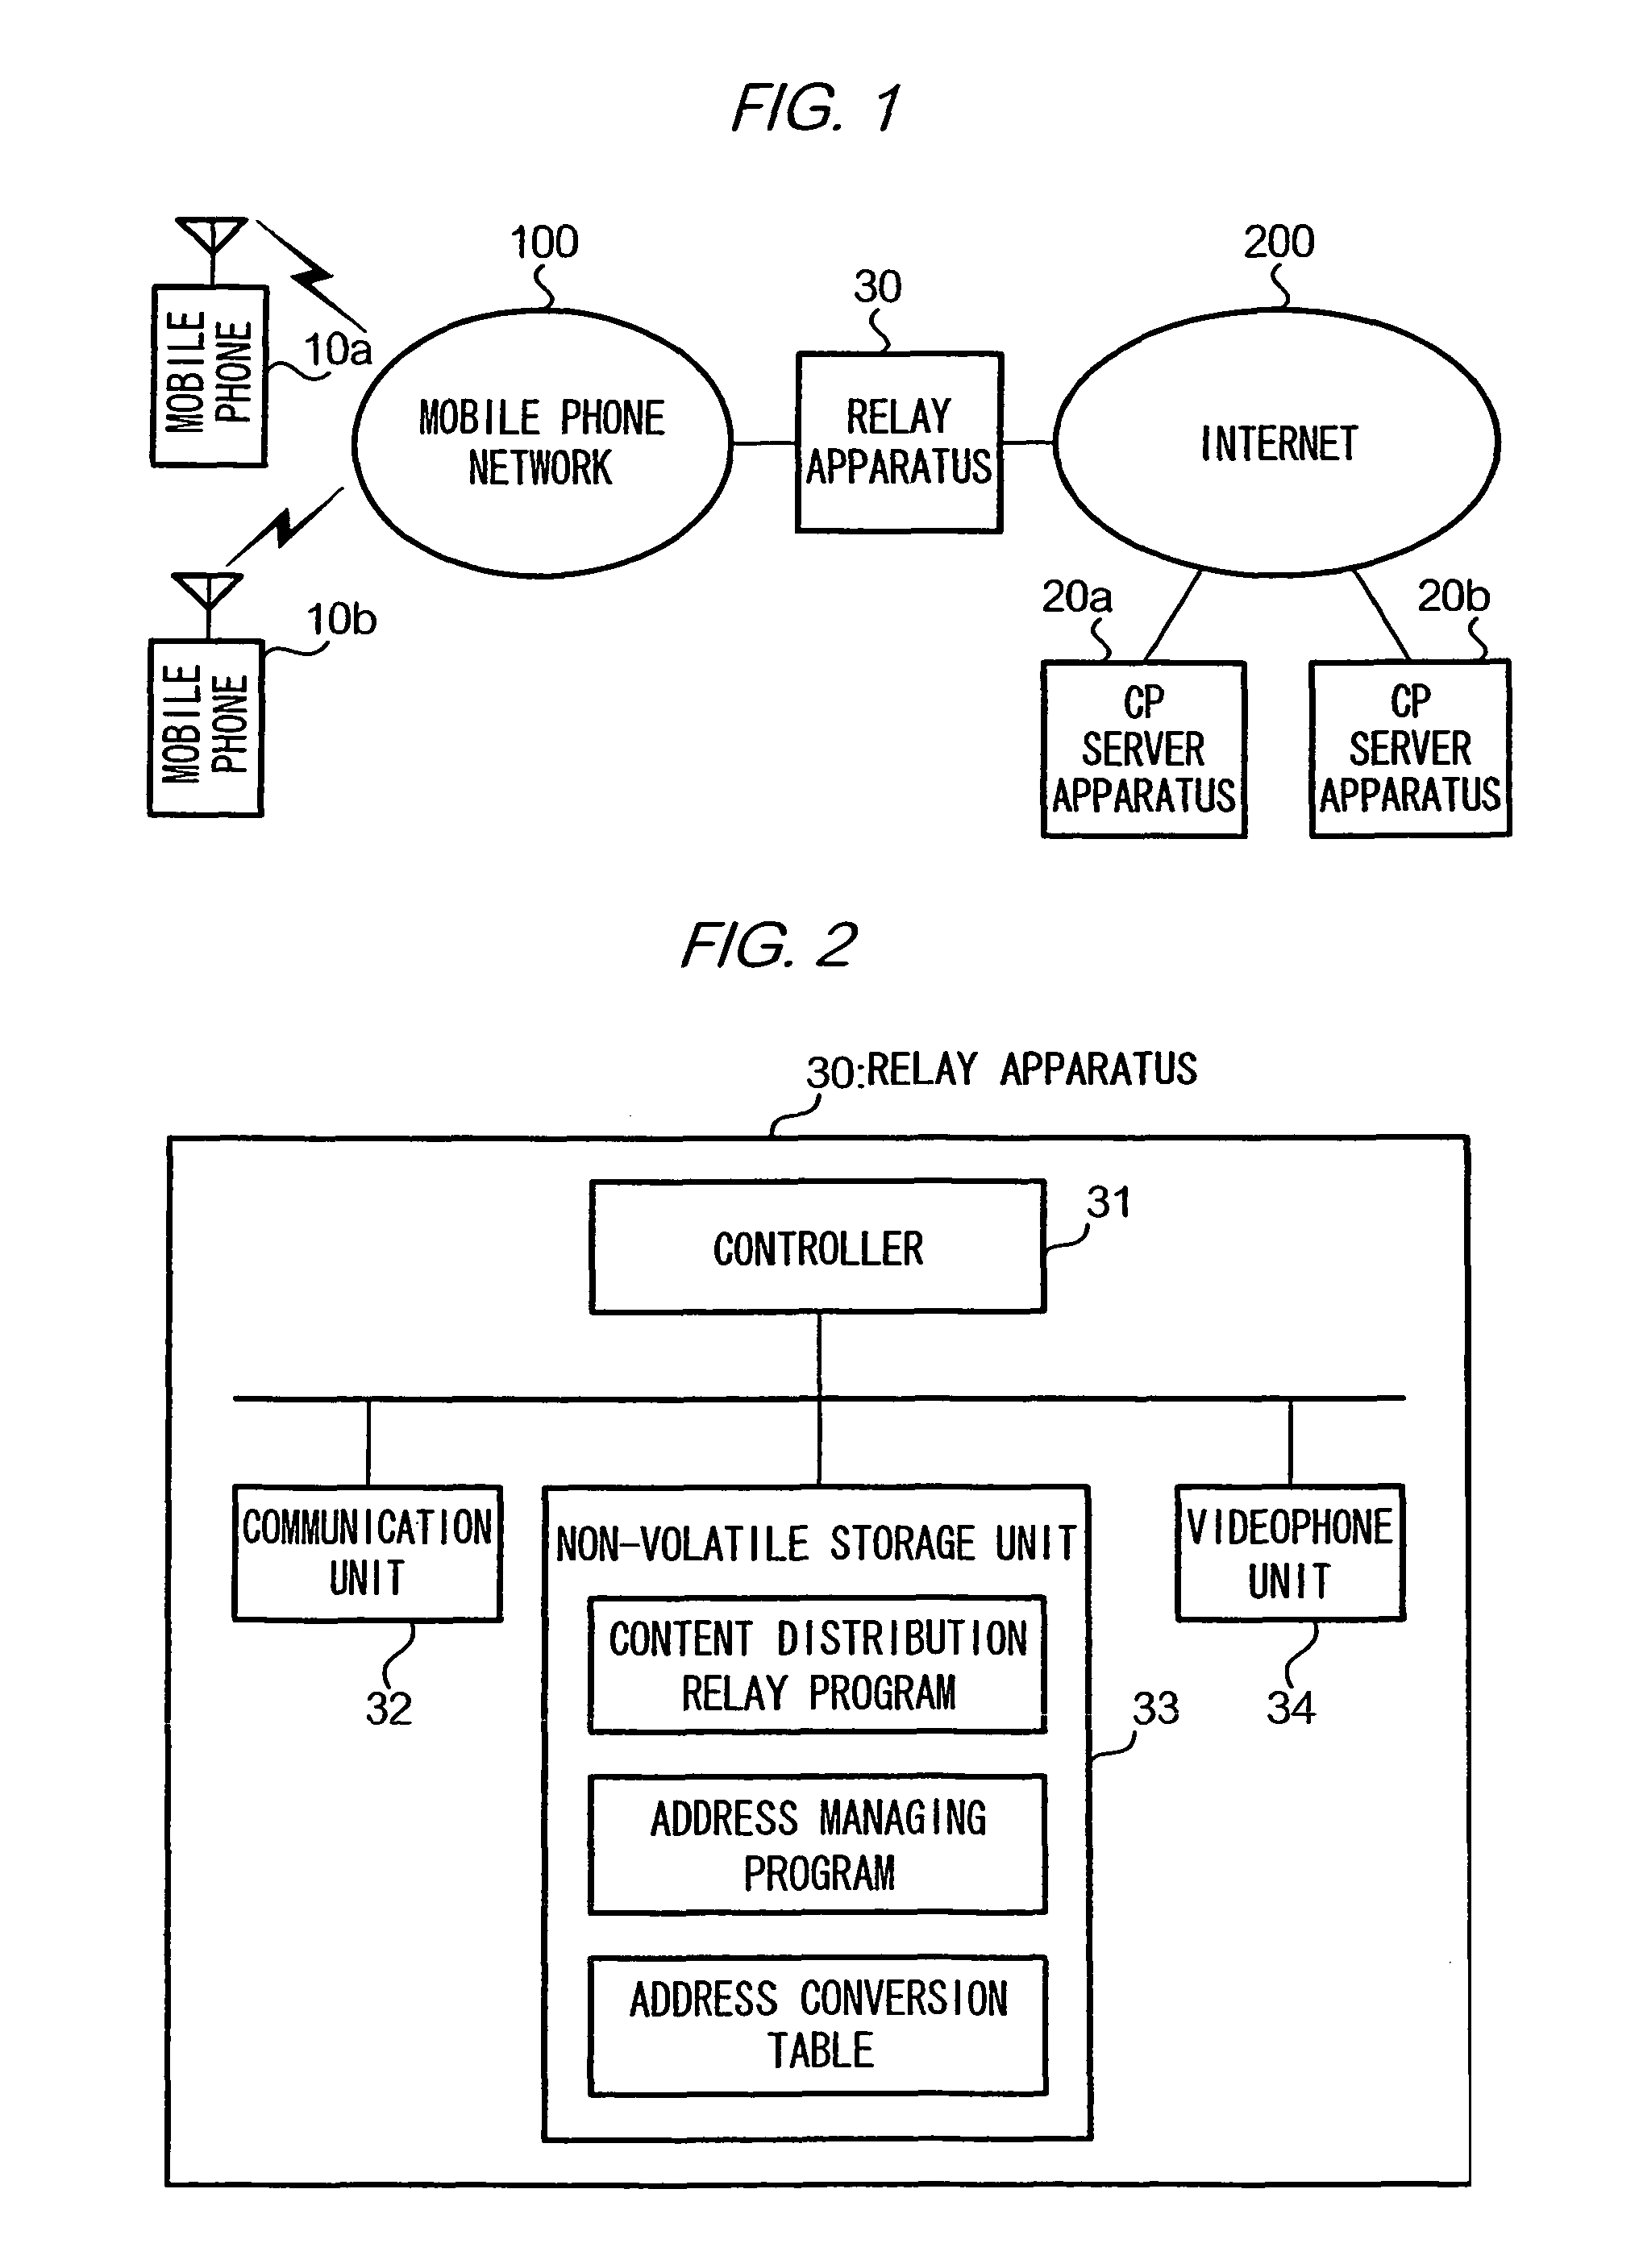 Content distribution method and relay apparatus